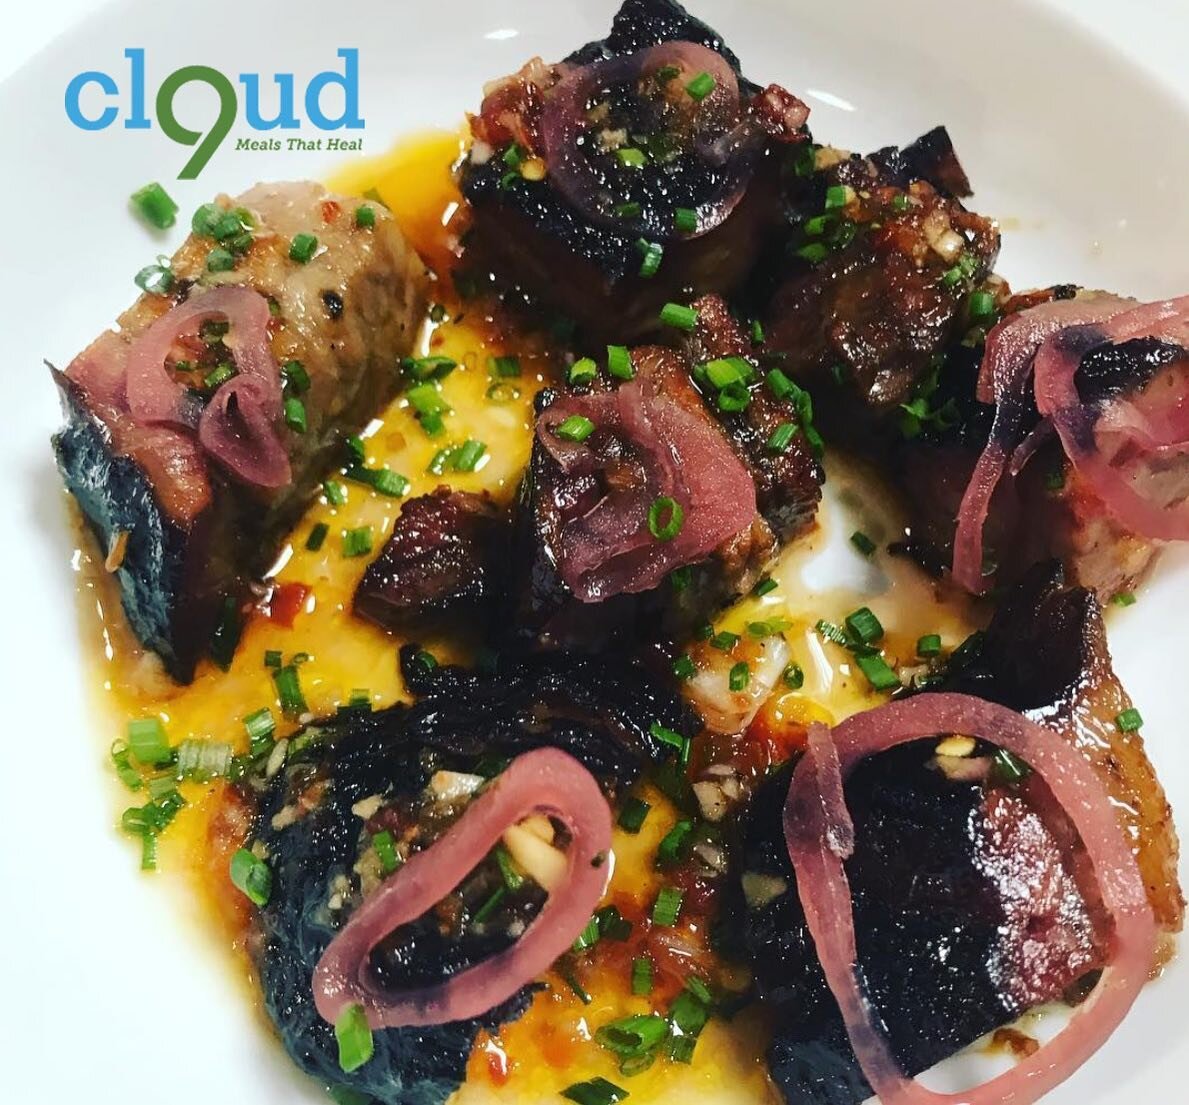 Burnt Ends, Infused Broken Larry Sauce, Pickled Shallots.  So Good!! Put your appetite on cloud 9 #cannabisinfusions #hempoil #cbd #mealsthatheal #cannabiscommunity #weedcooking #cannabischefs